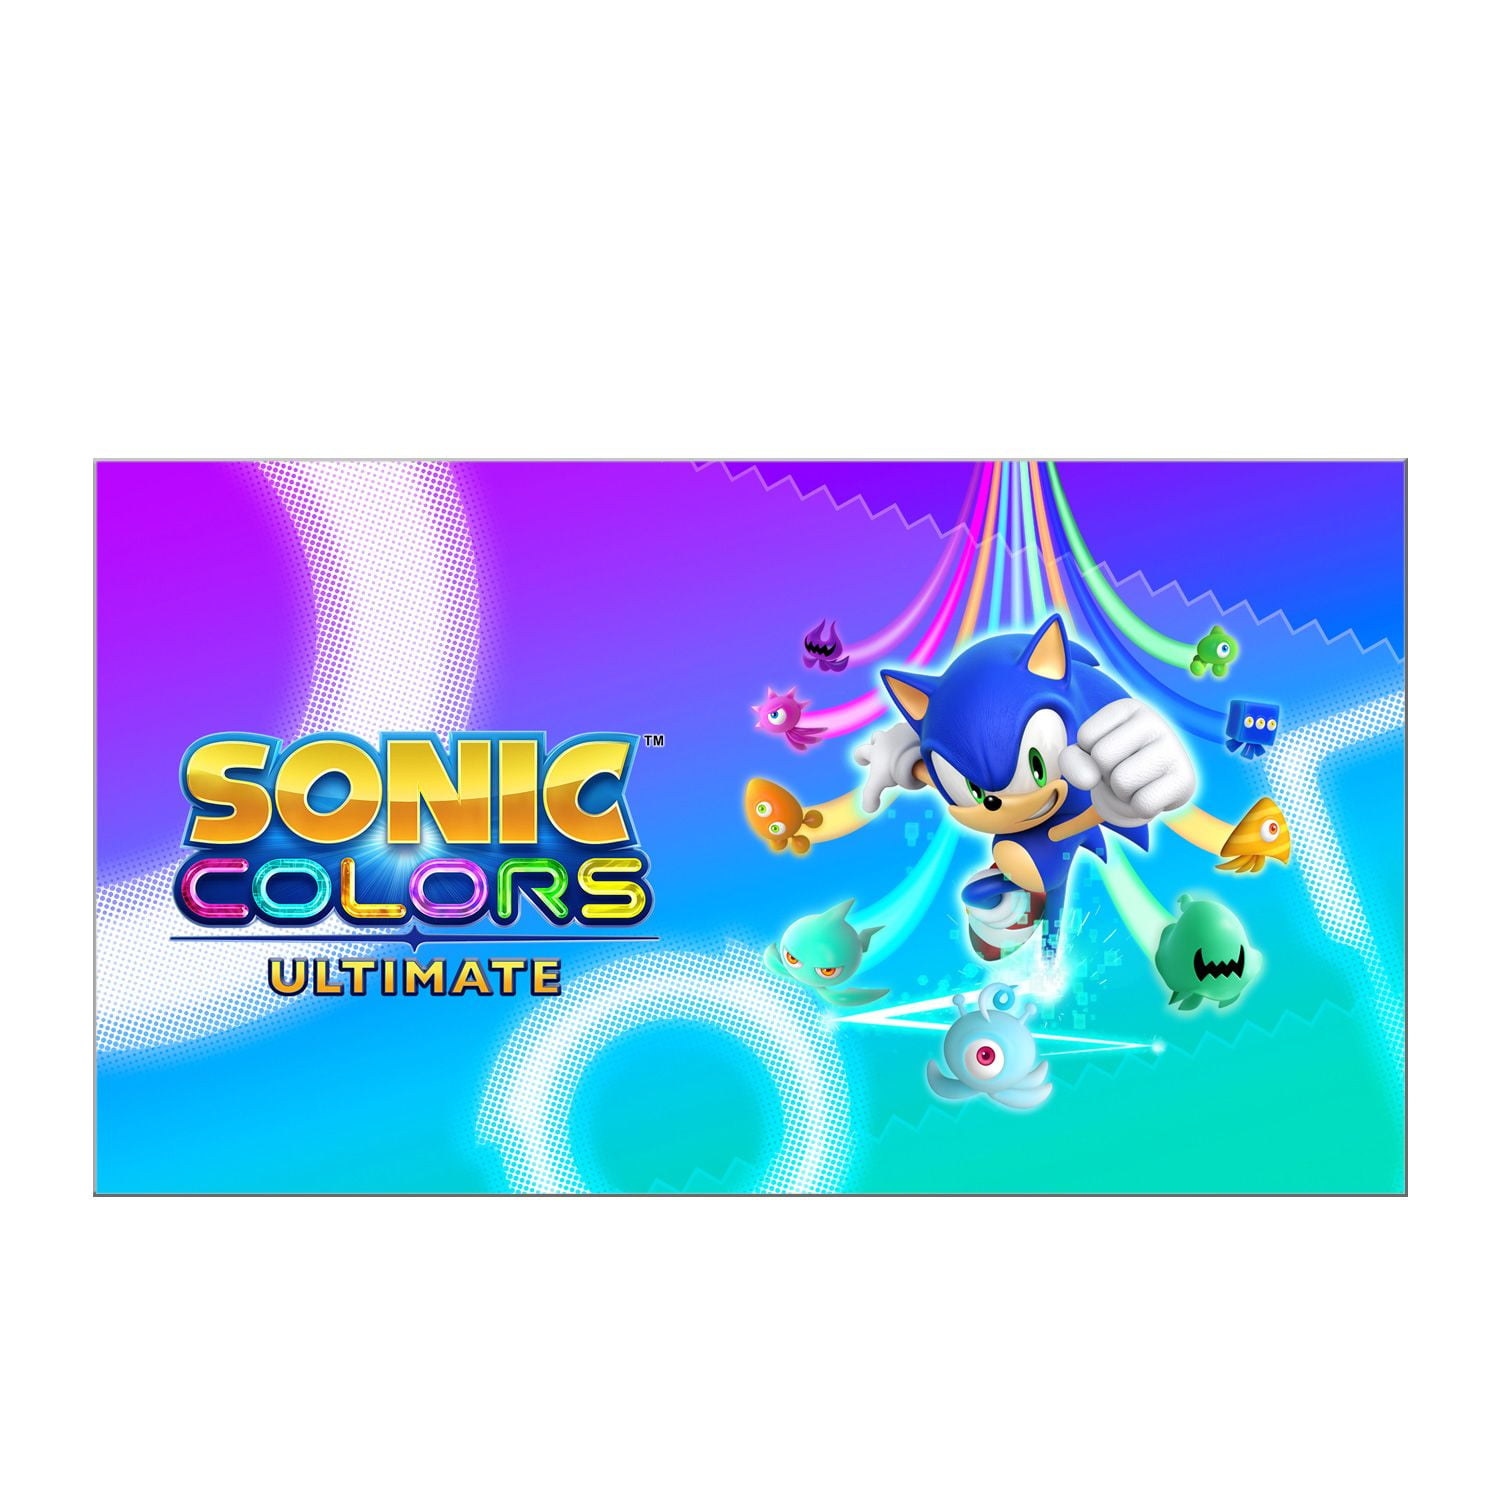 Co-Optimus - Sonic Colors: Ultimate (Nintendo Switch) Co-Op